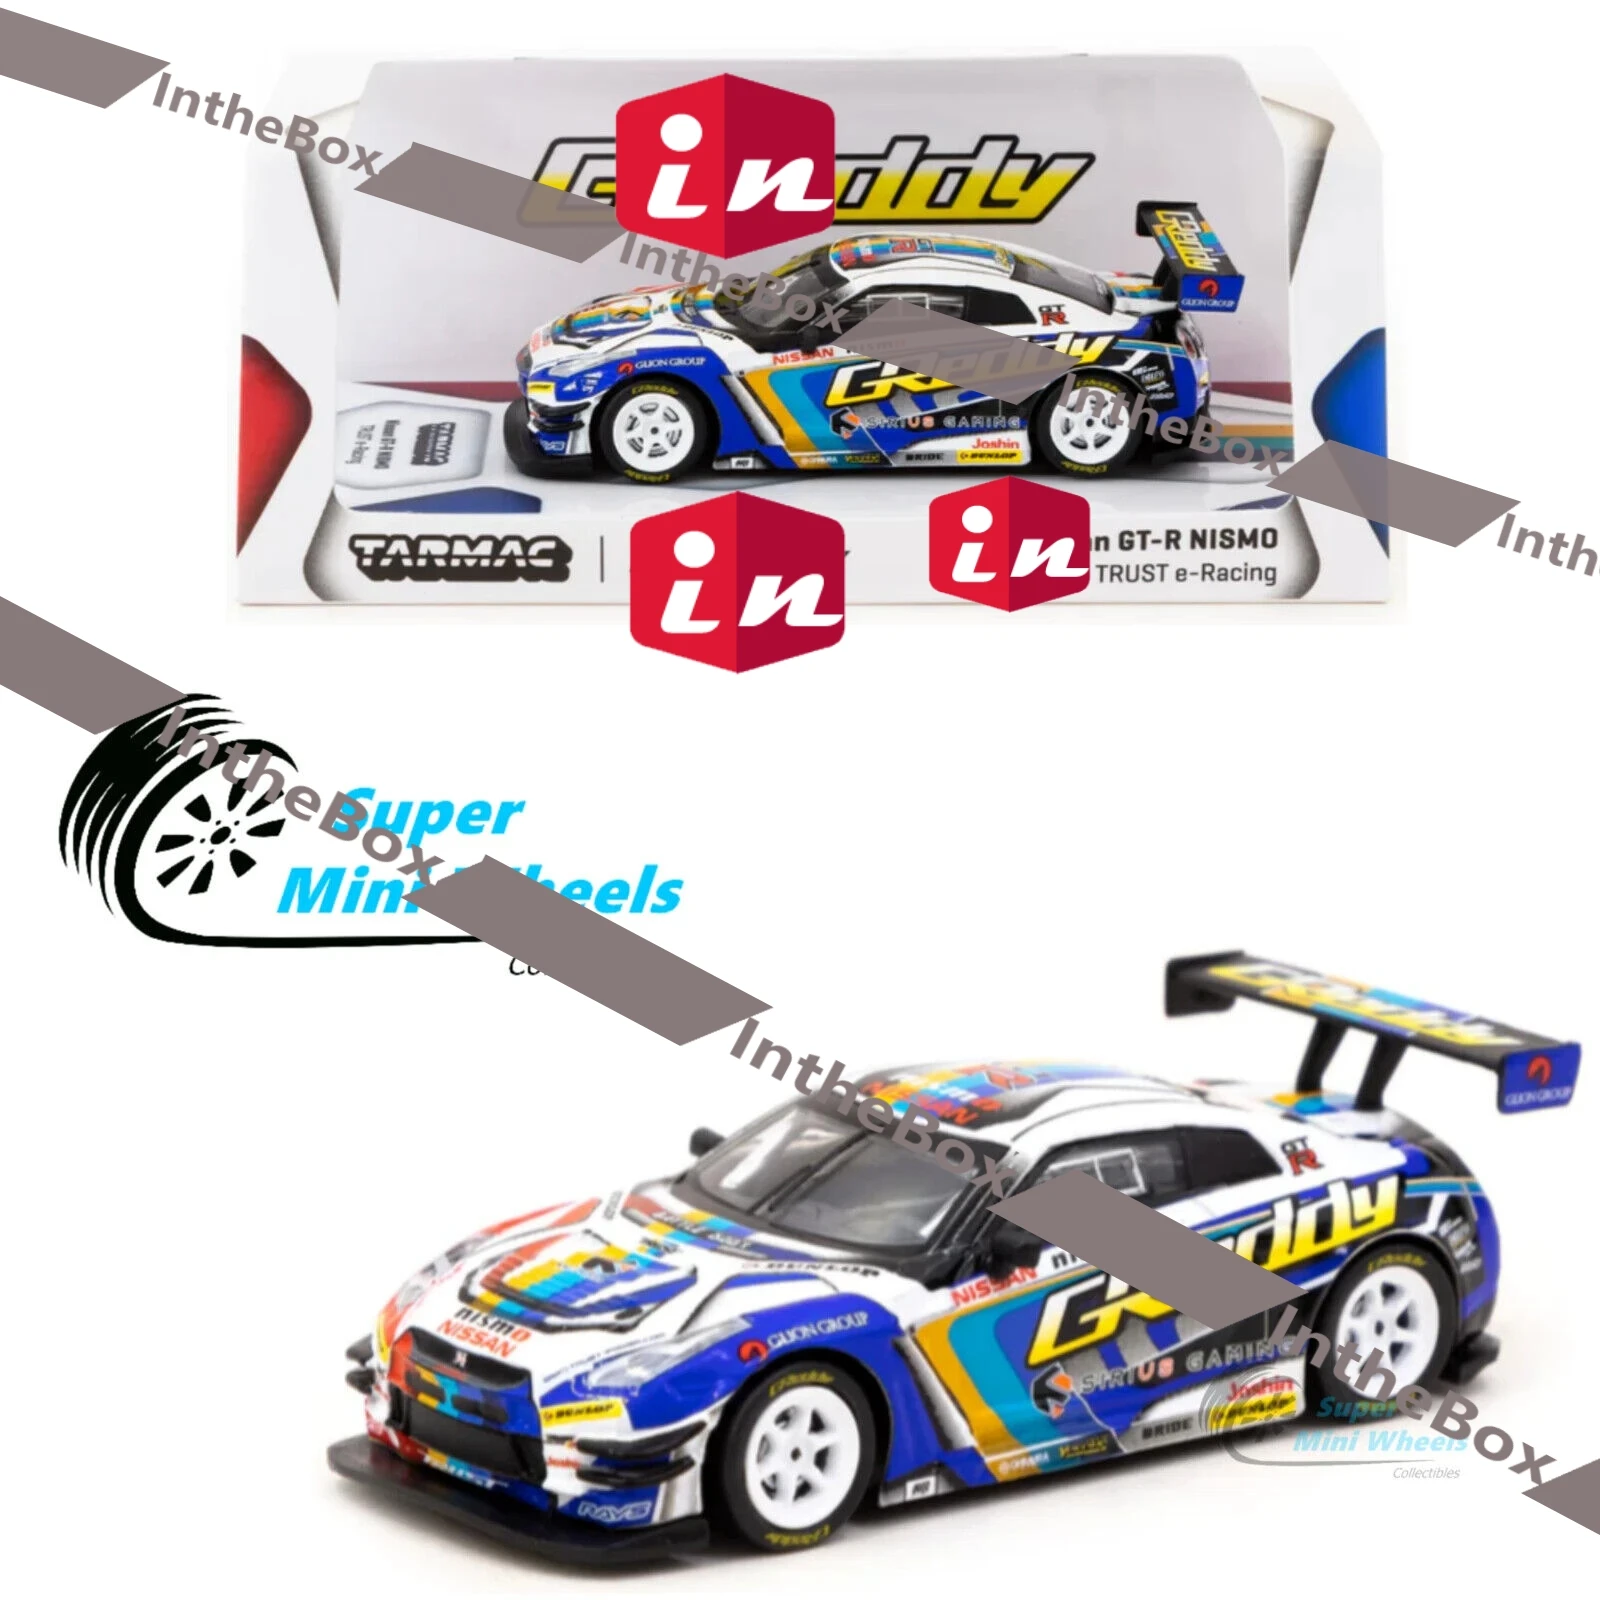 

Tarmac Works 1:64 GT-R R35 TRUST e-Racing Diecast Model Car Collection Limited Editon Hobby Toys